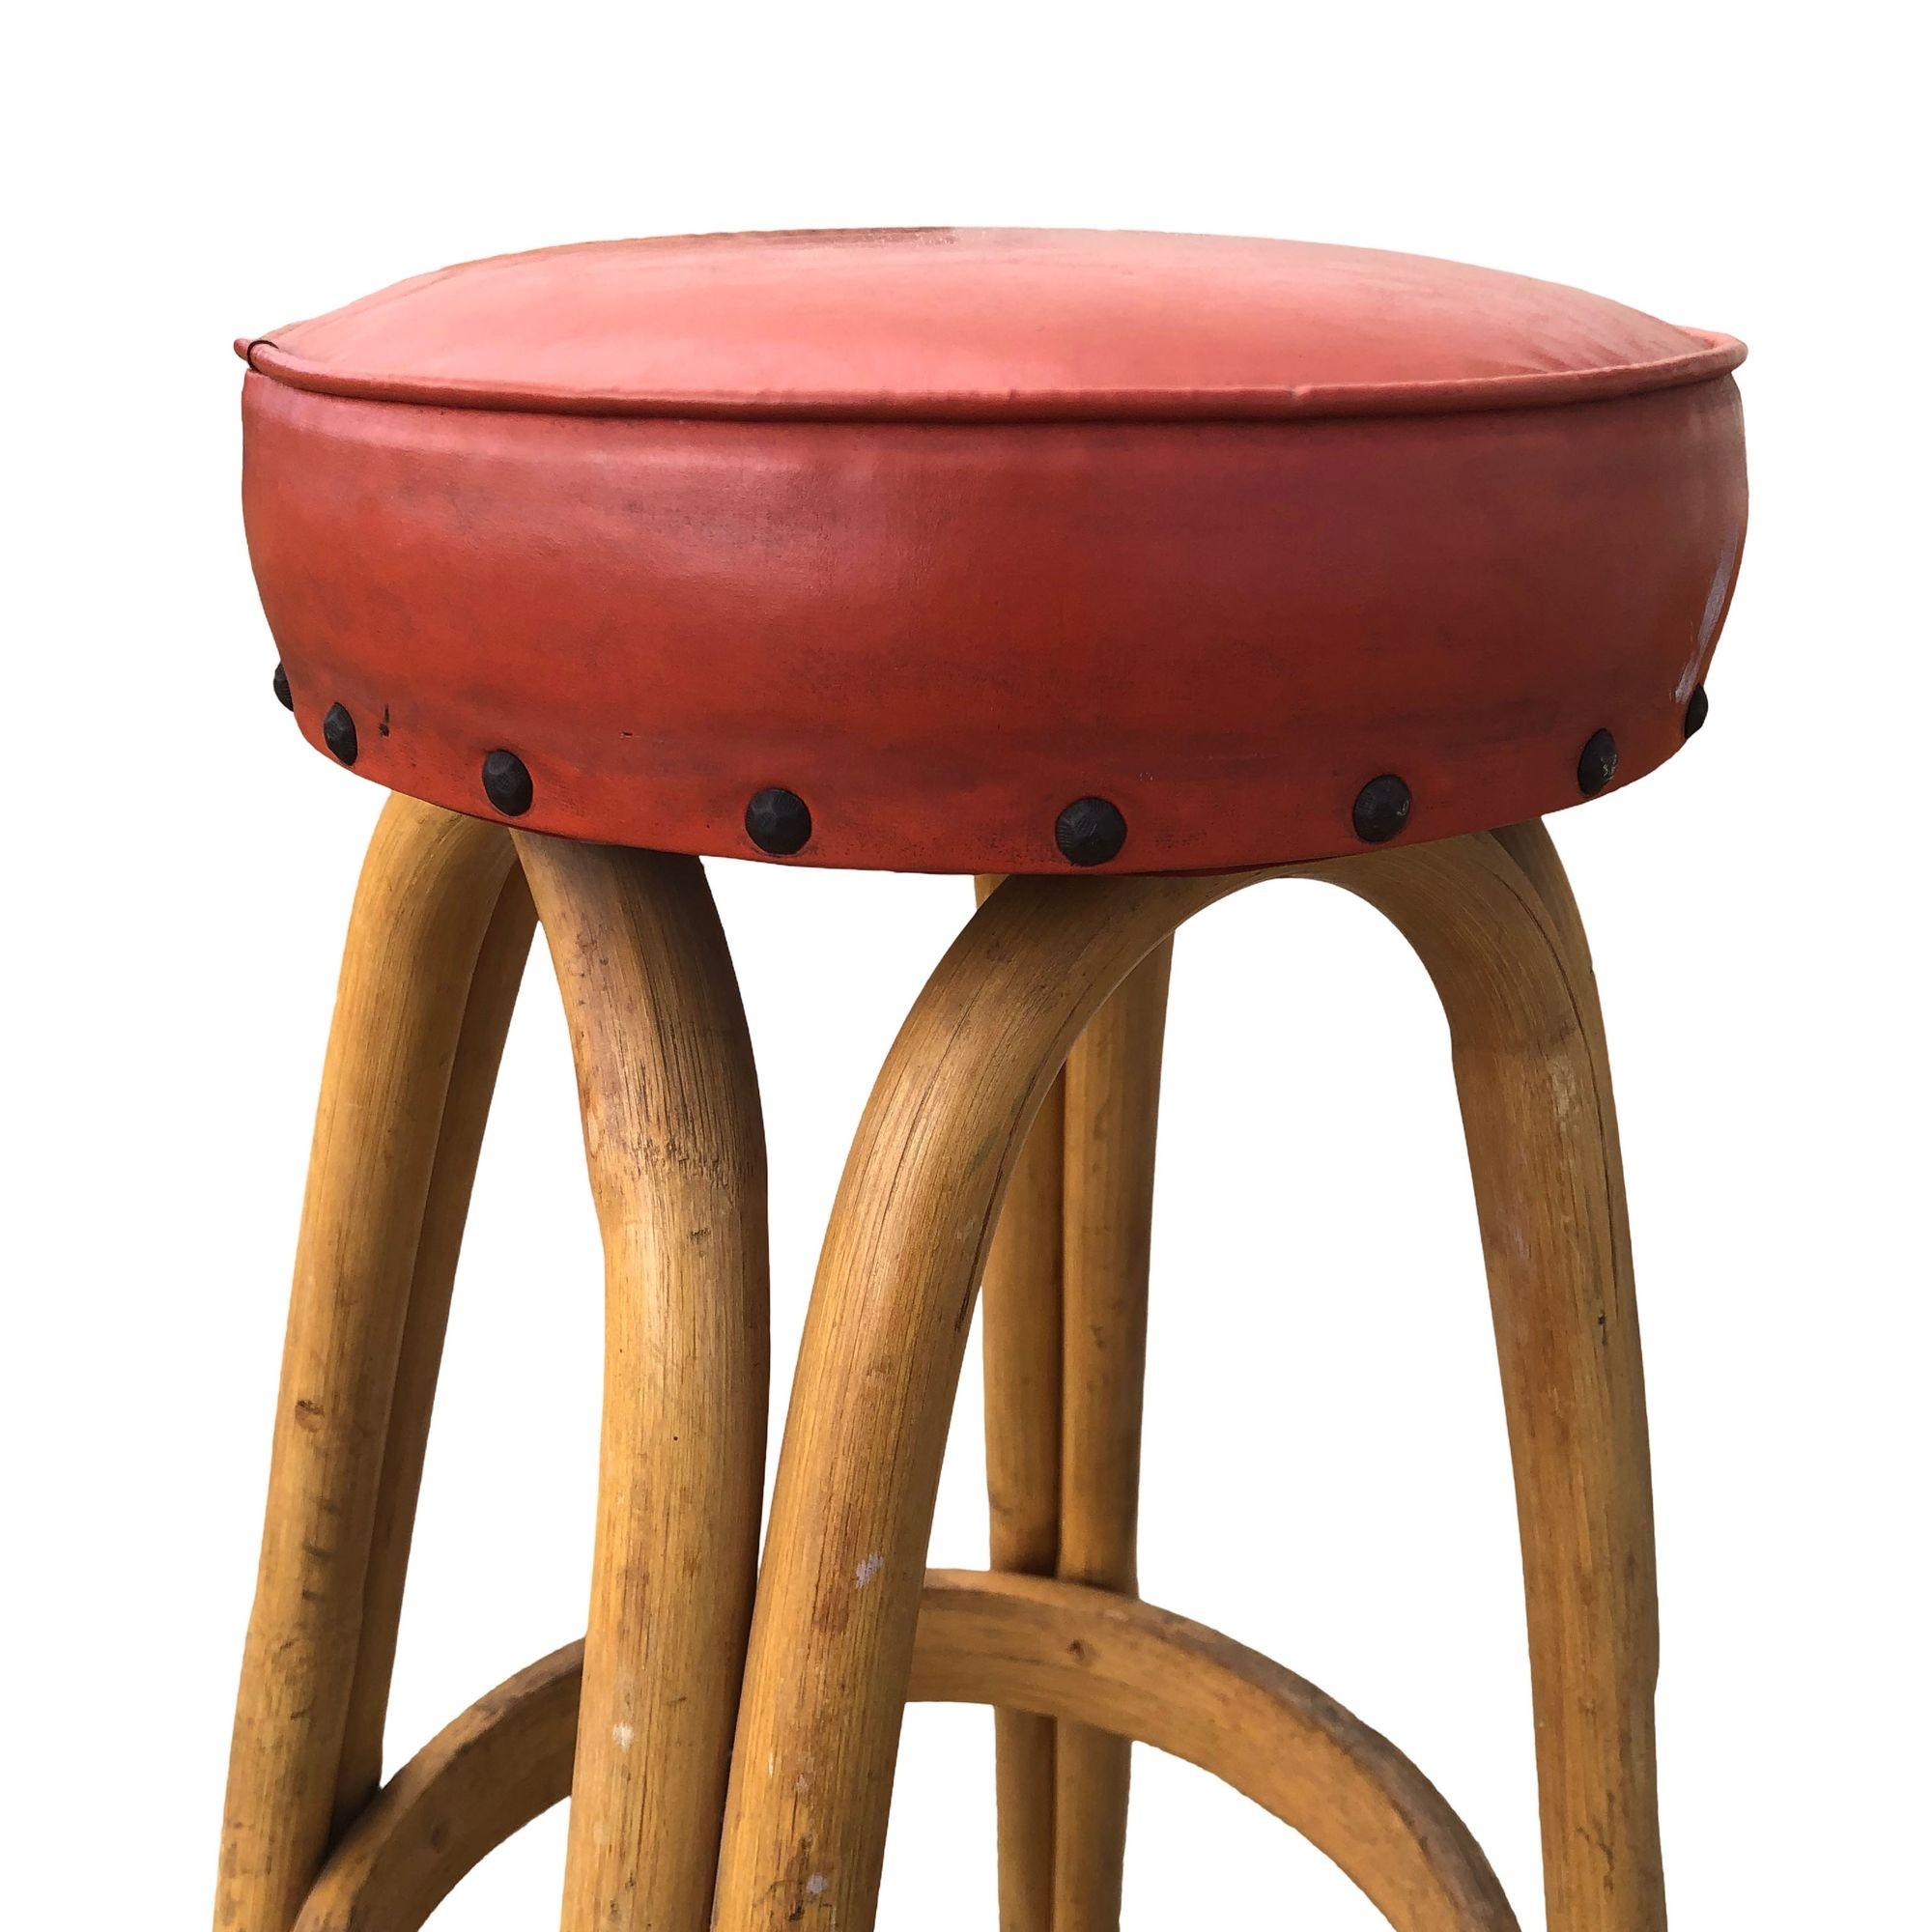 Mid-20th Century Restored arched Rattan Bar Stools w/ Studded Nailhead Red Seats, Set of 5 For Sale